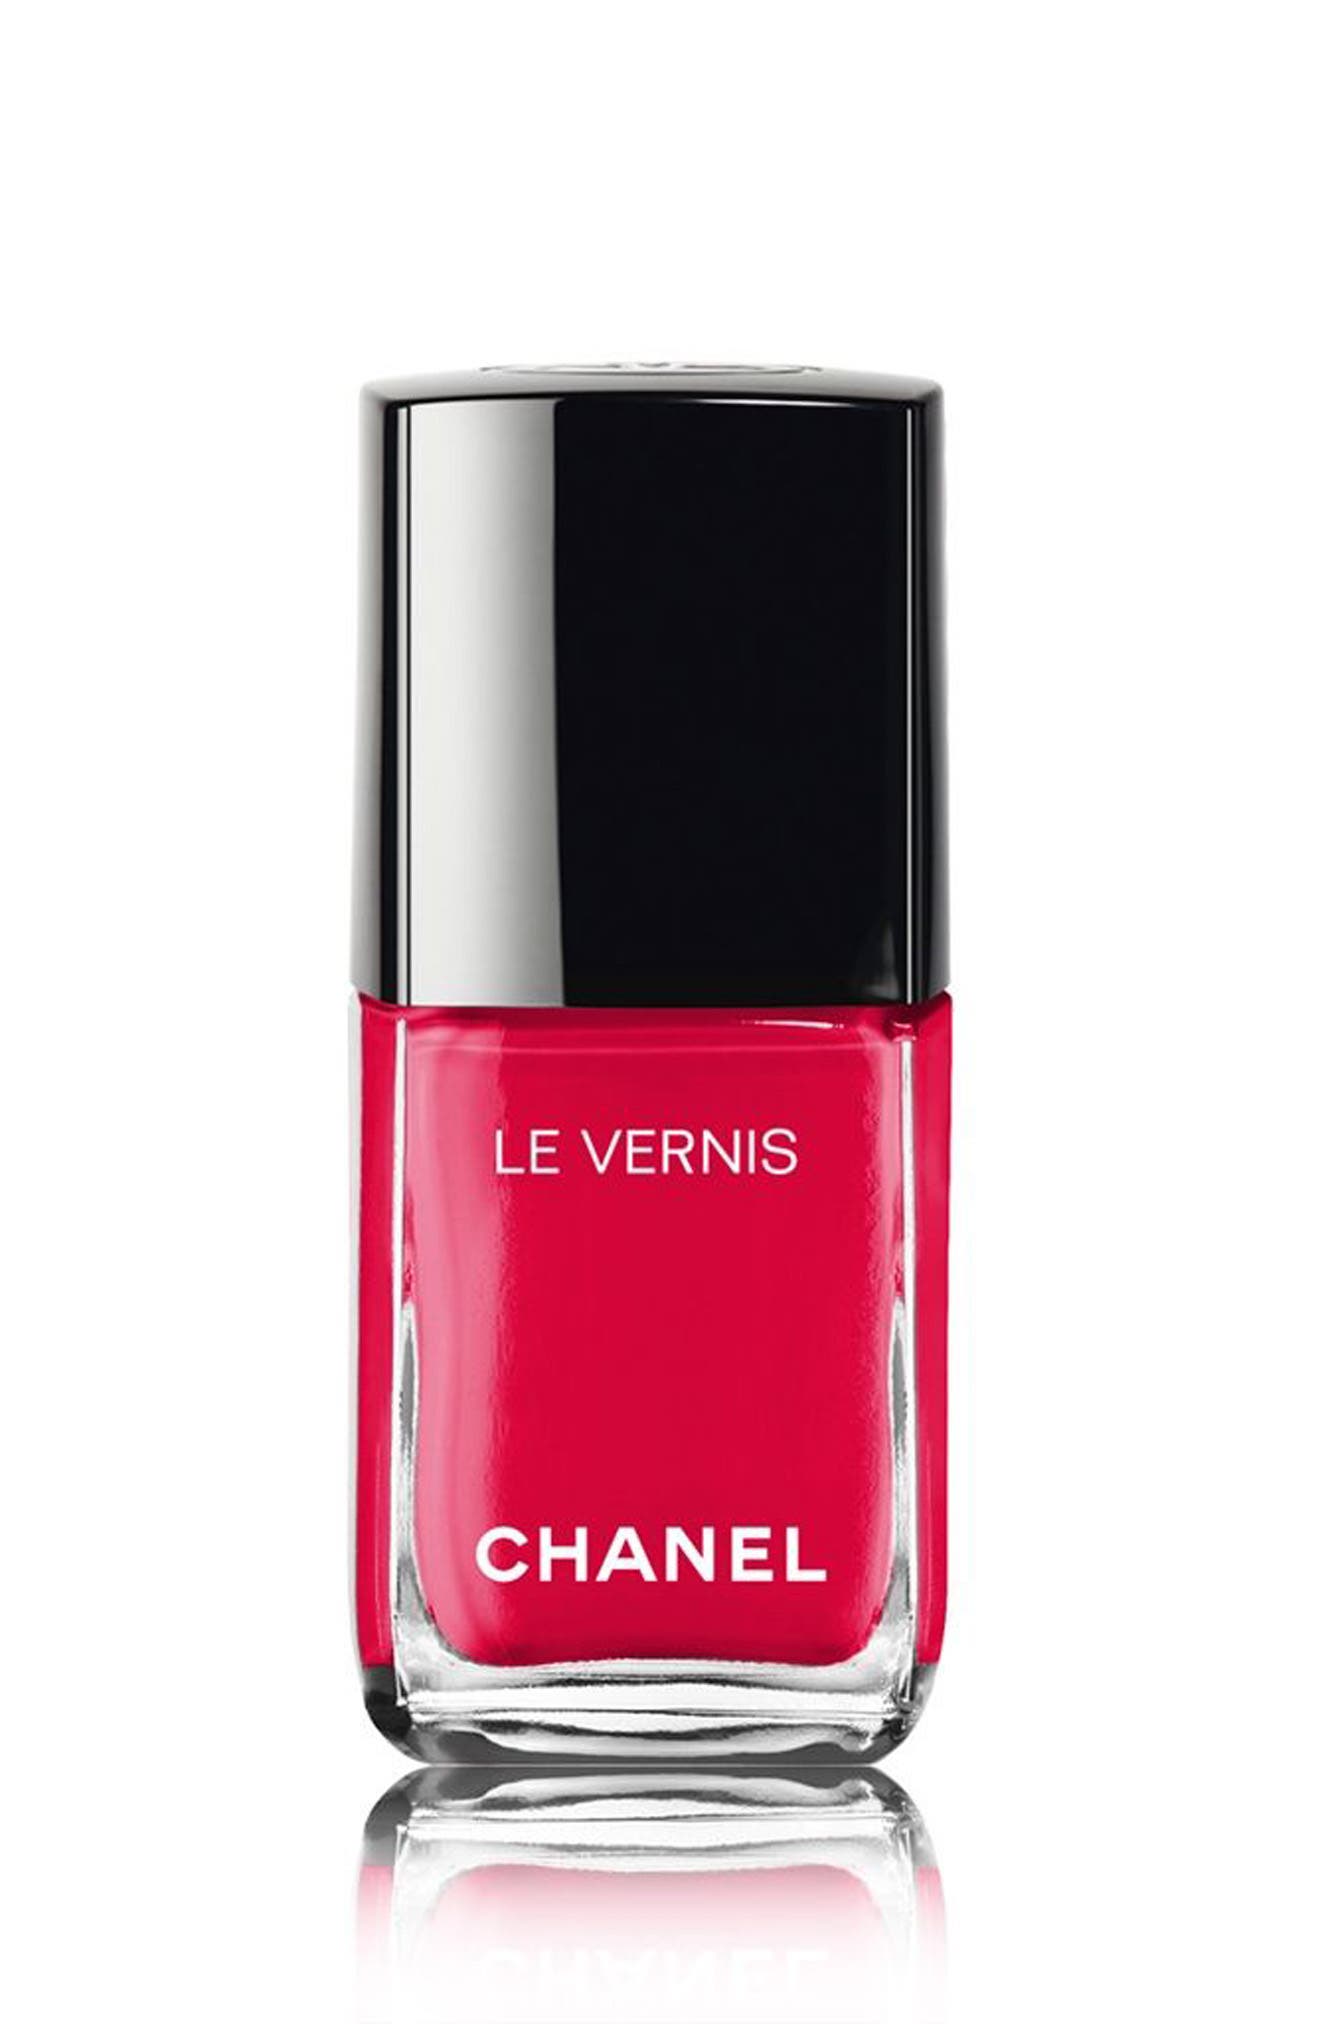 Chanel Le Vernis Nail Colour - 560 Coquillage